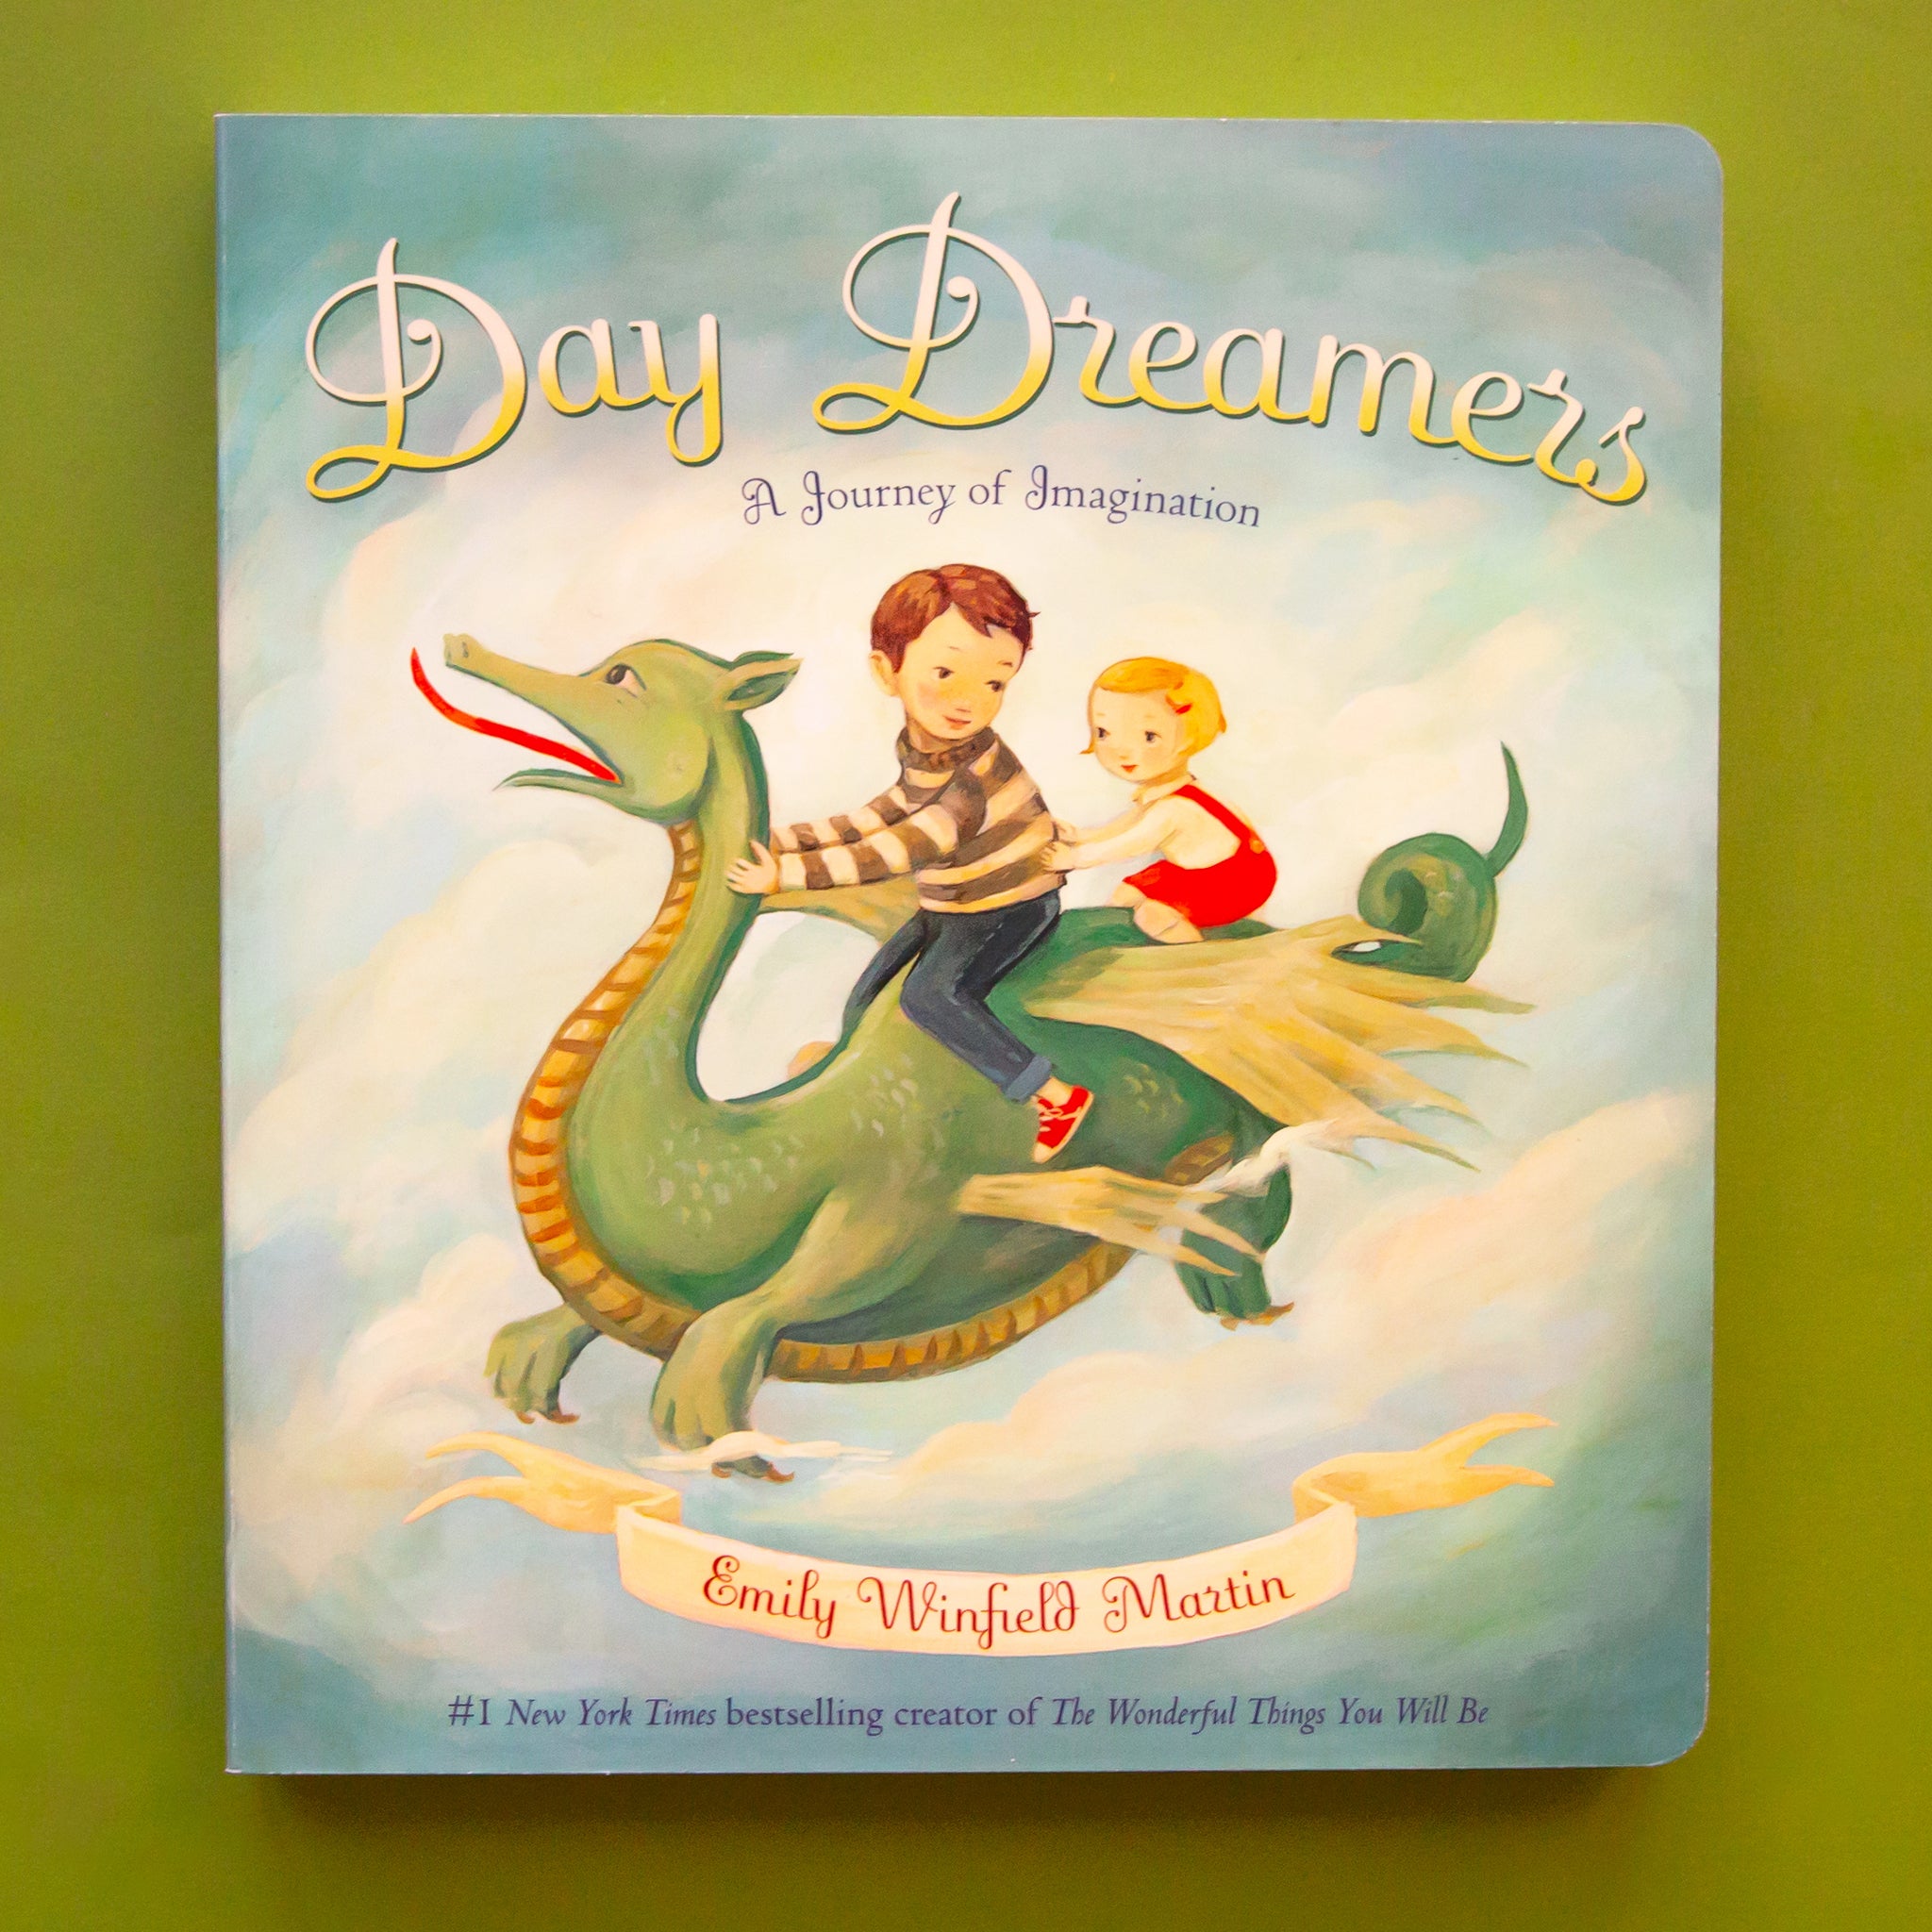 An aqua green book cover with the title, "Day Dreamers: A Journey of Imagination" along with an illustration of a dragon and two kids riding through the sky.